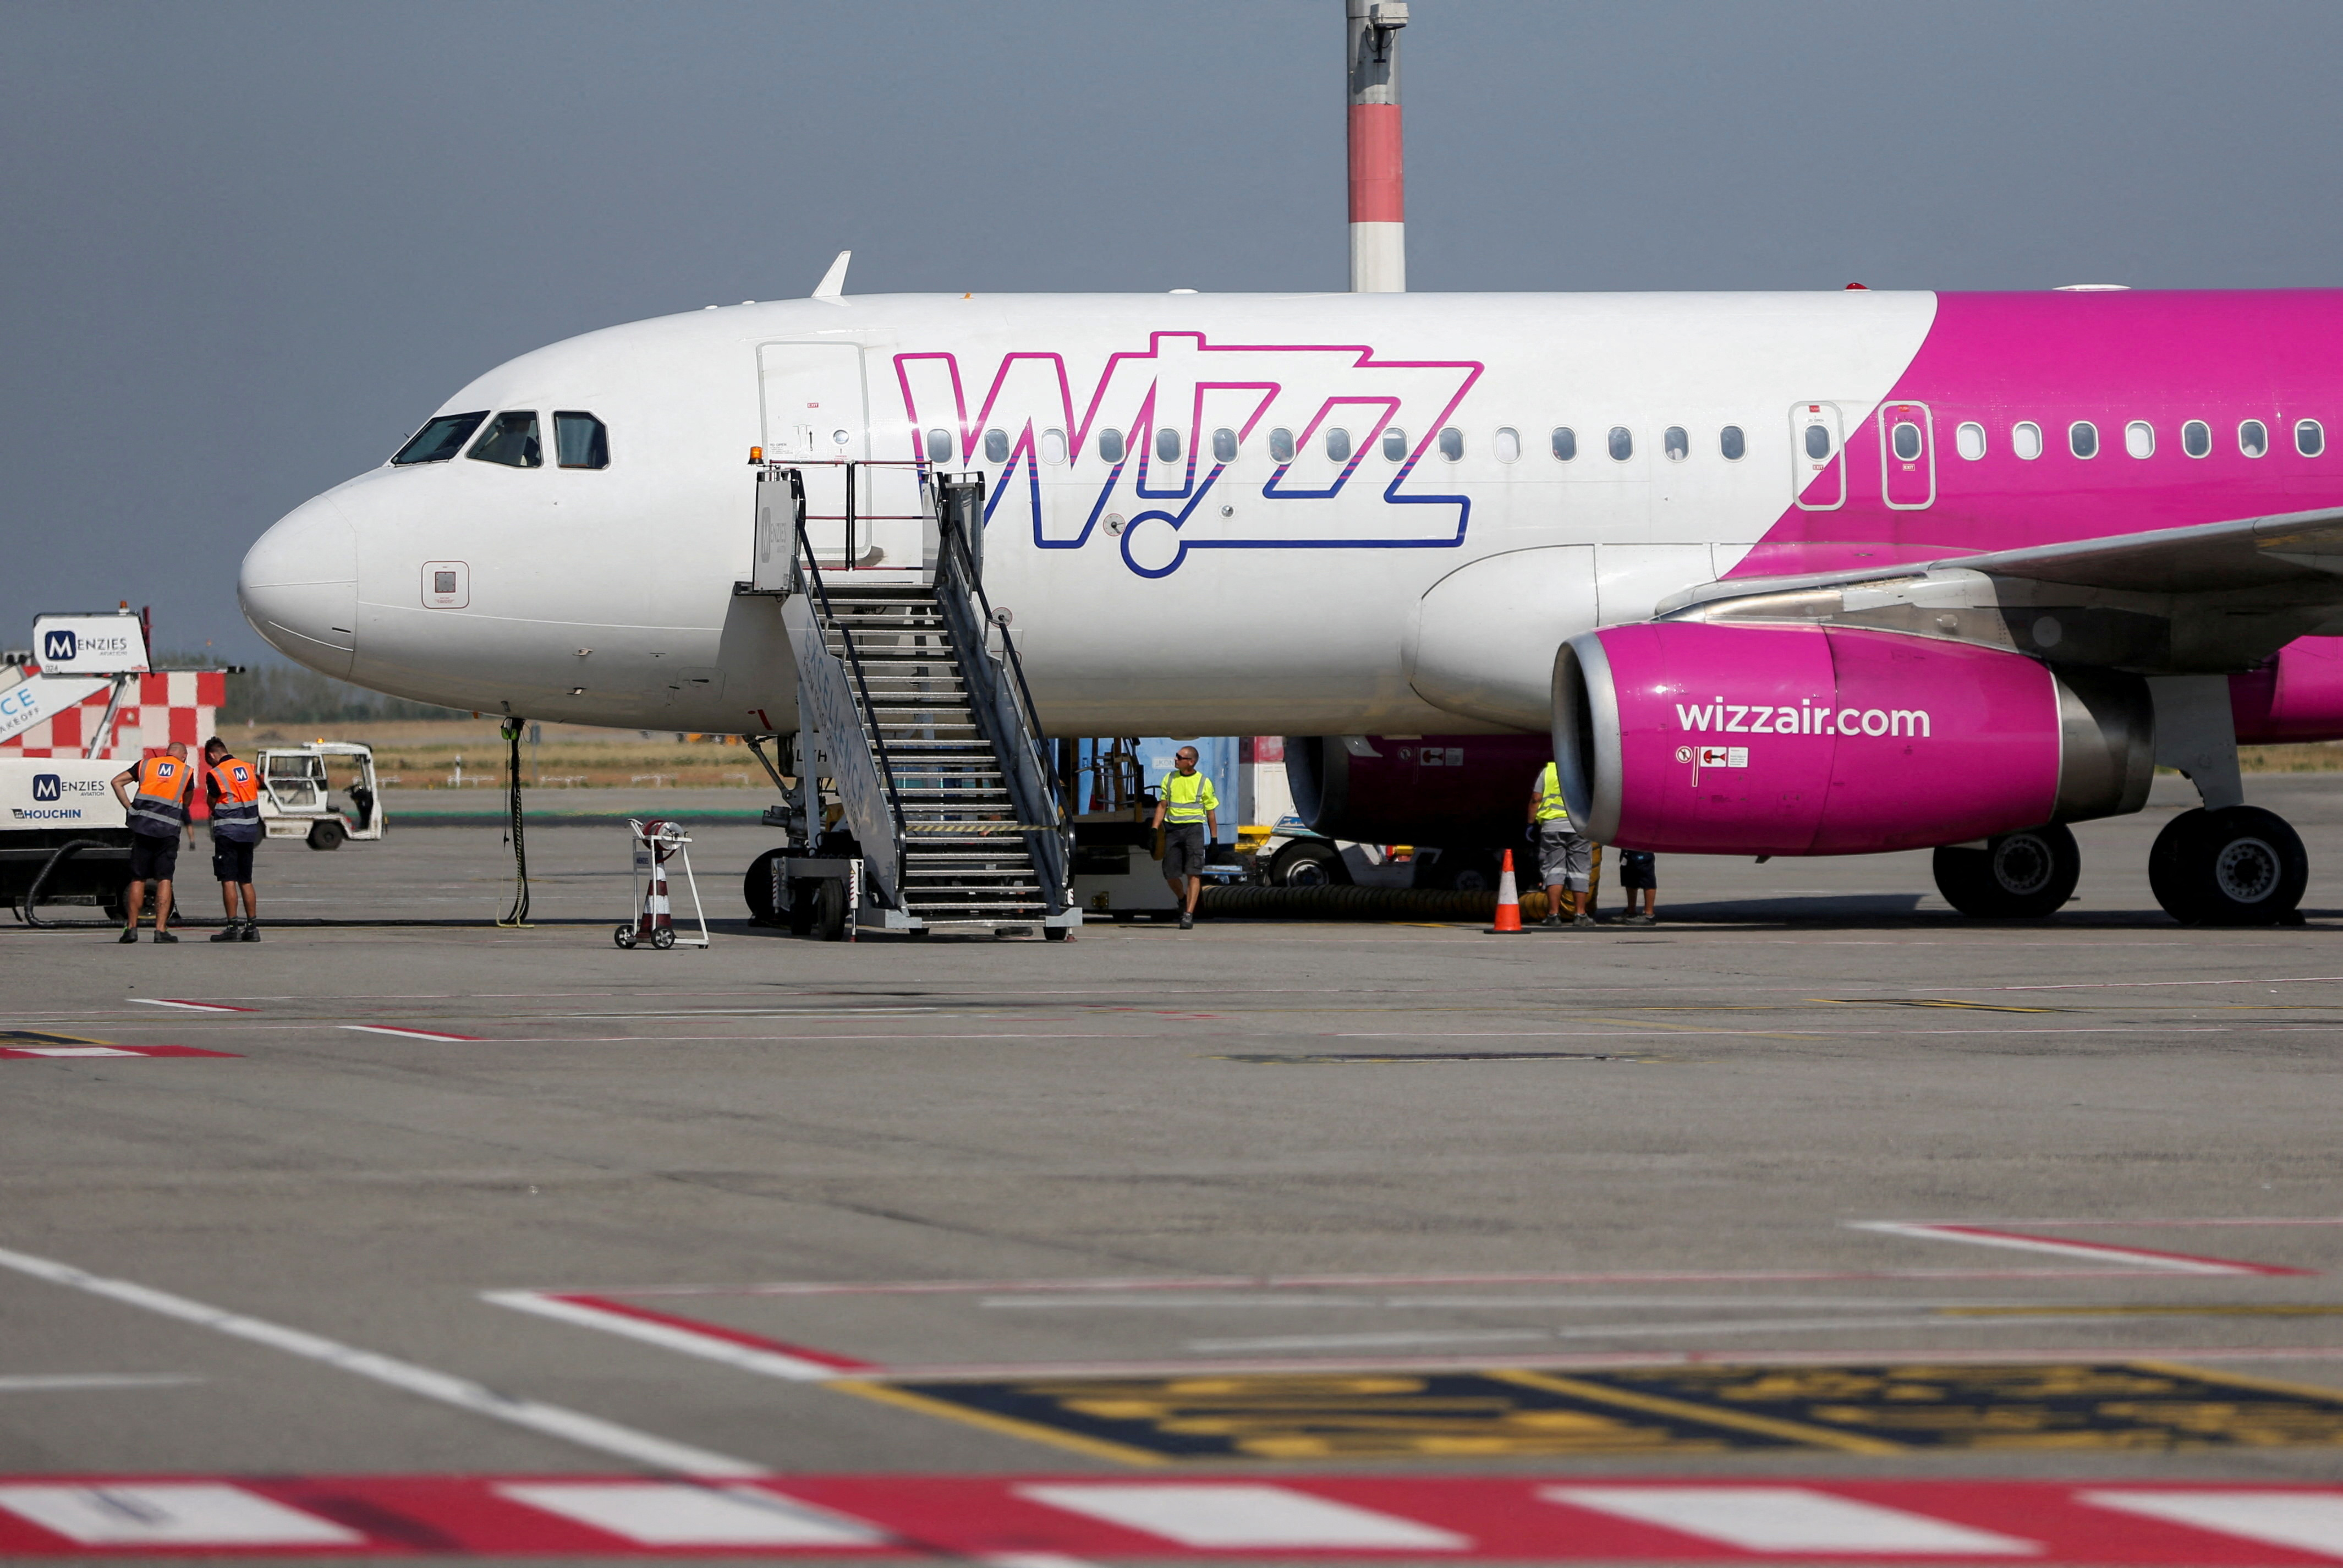 Wizz Air's aircraft is parked on the tarmac at Ferenc Liszt International Airport in Budapest